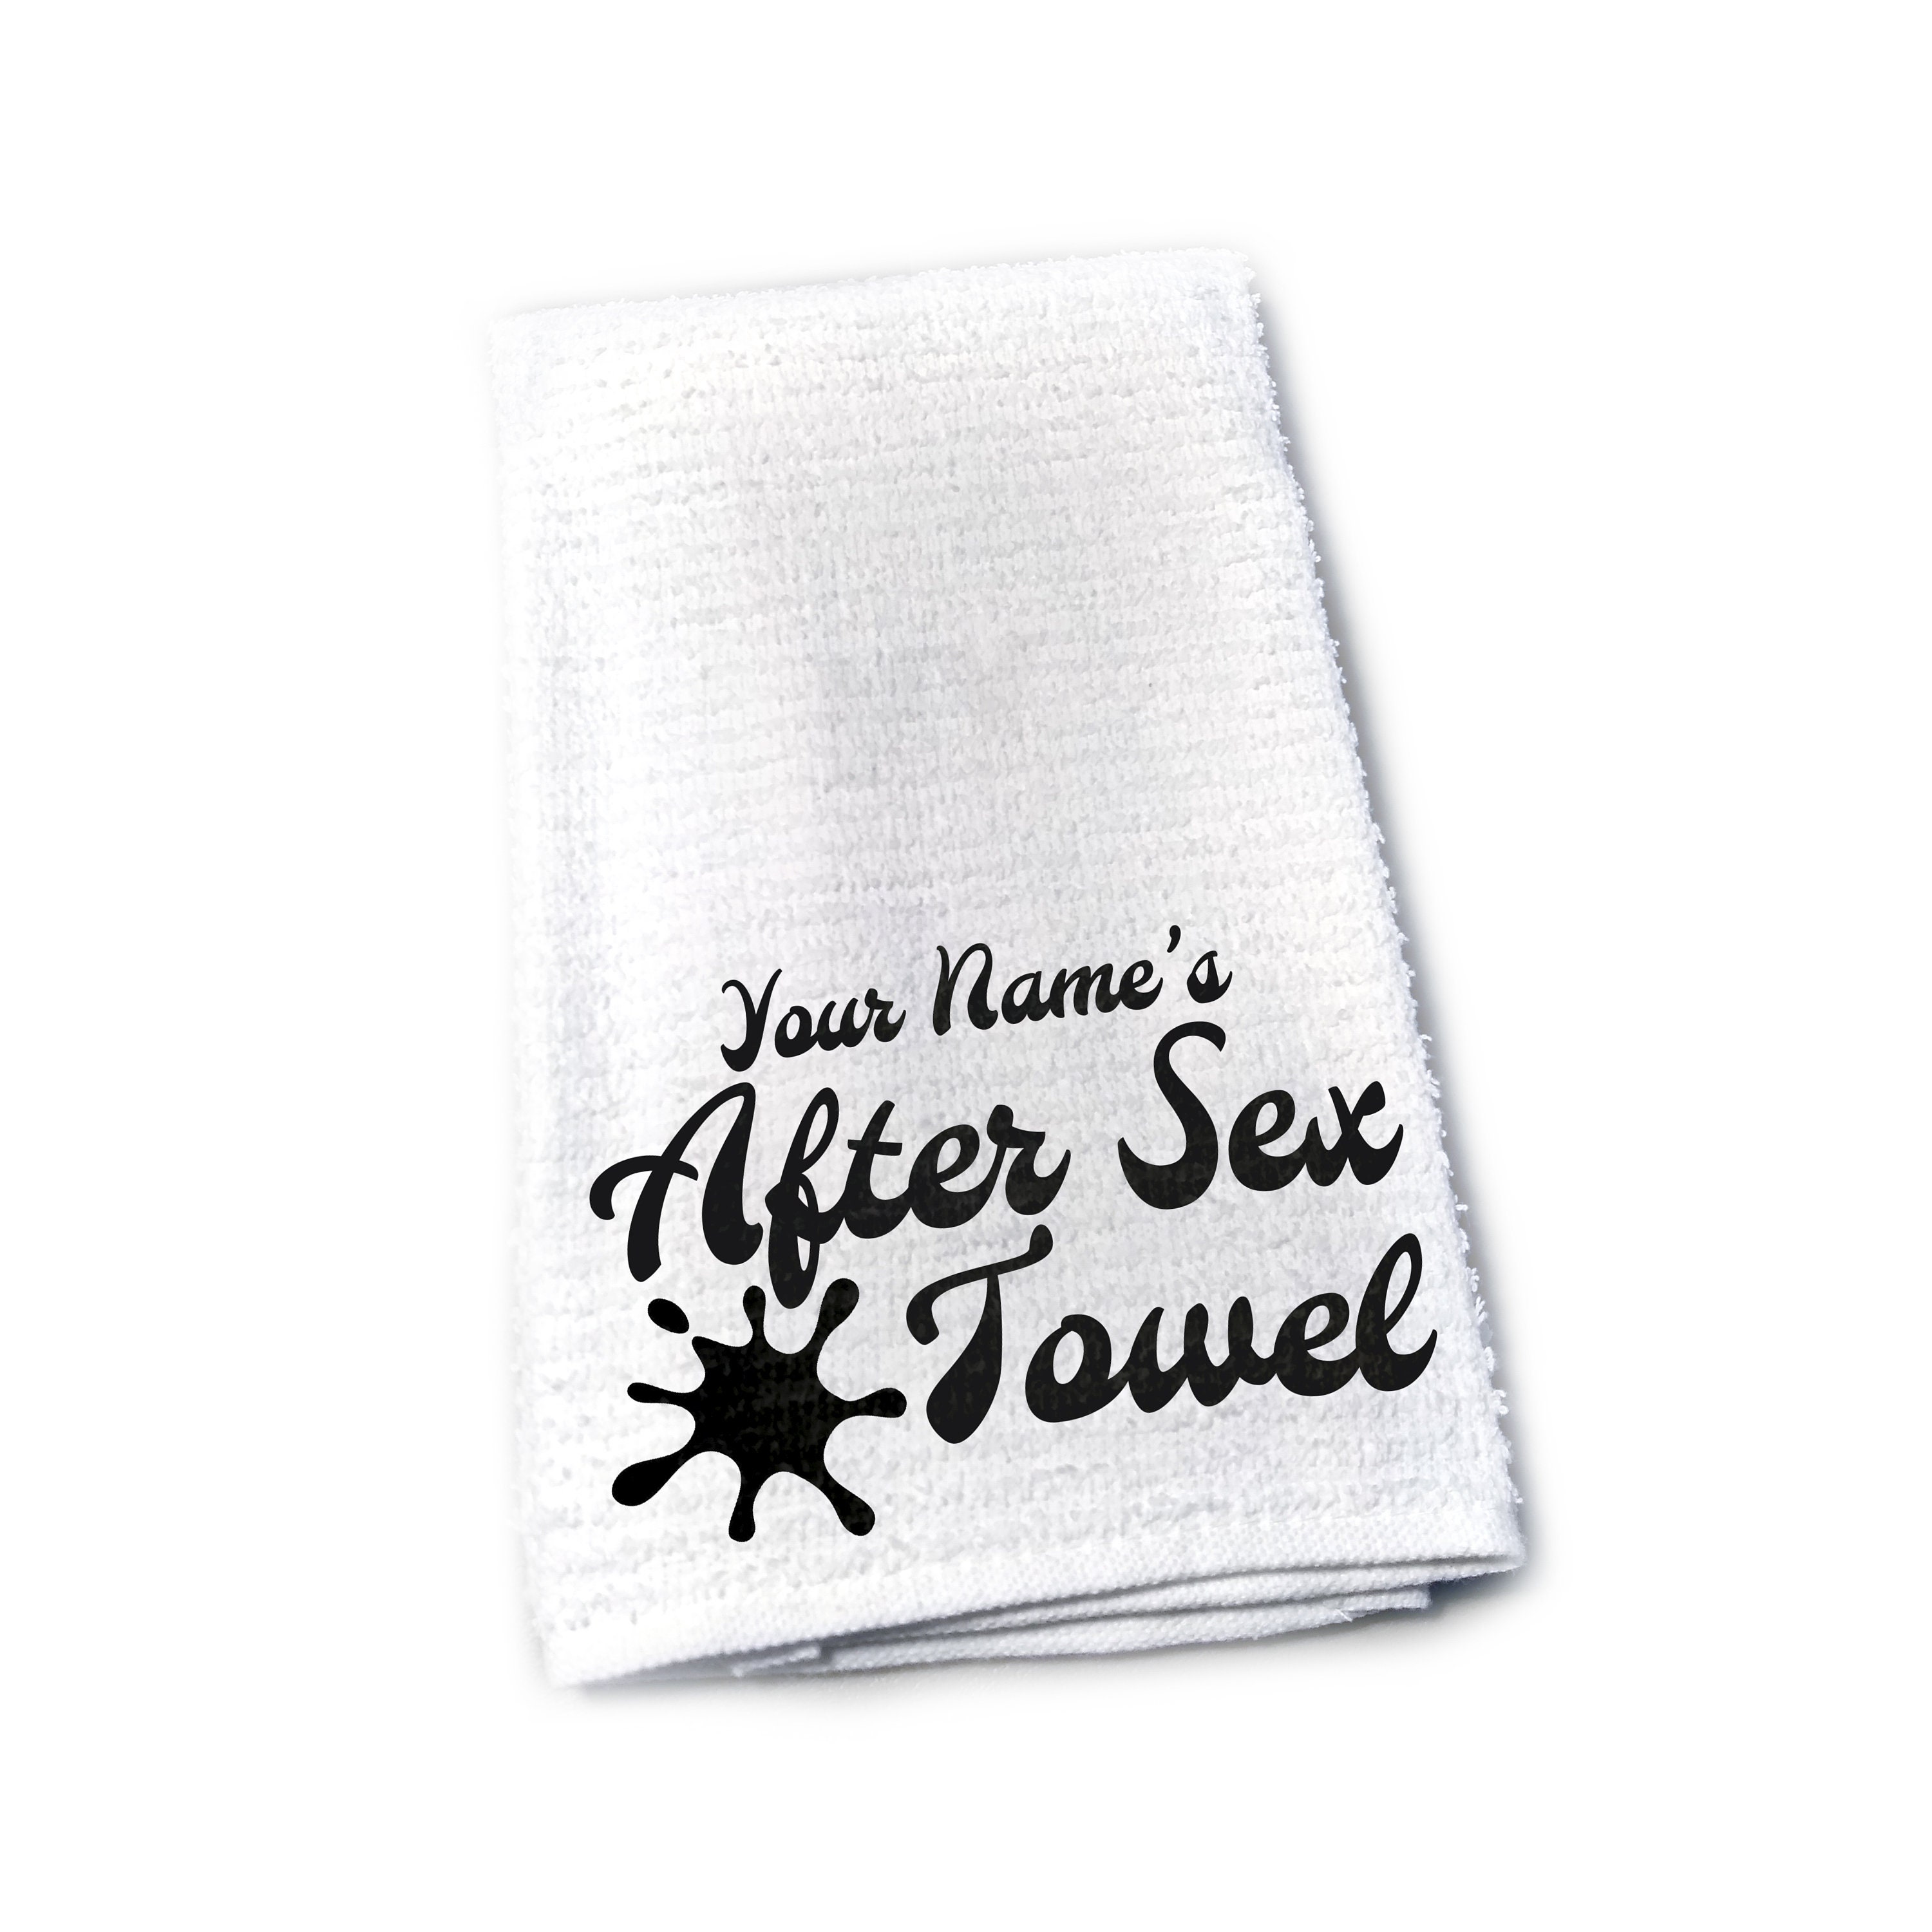 Personalized After Sex Towel Custom Printed With Your Name photo